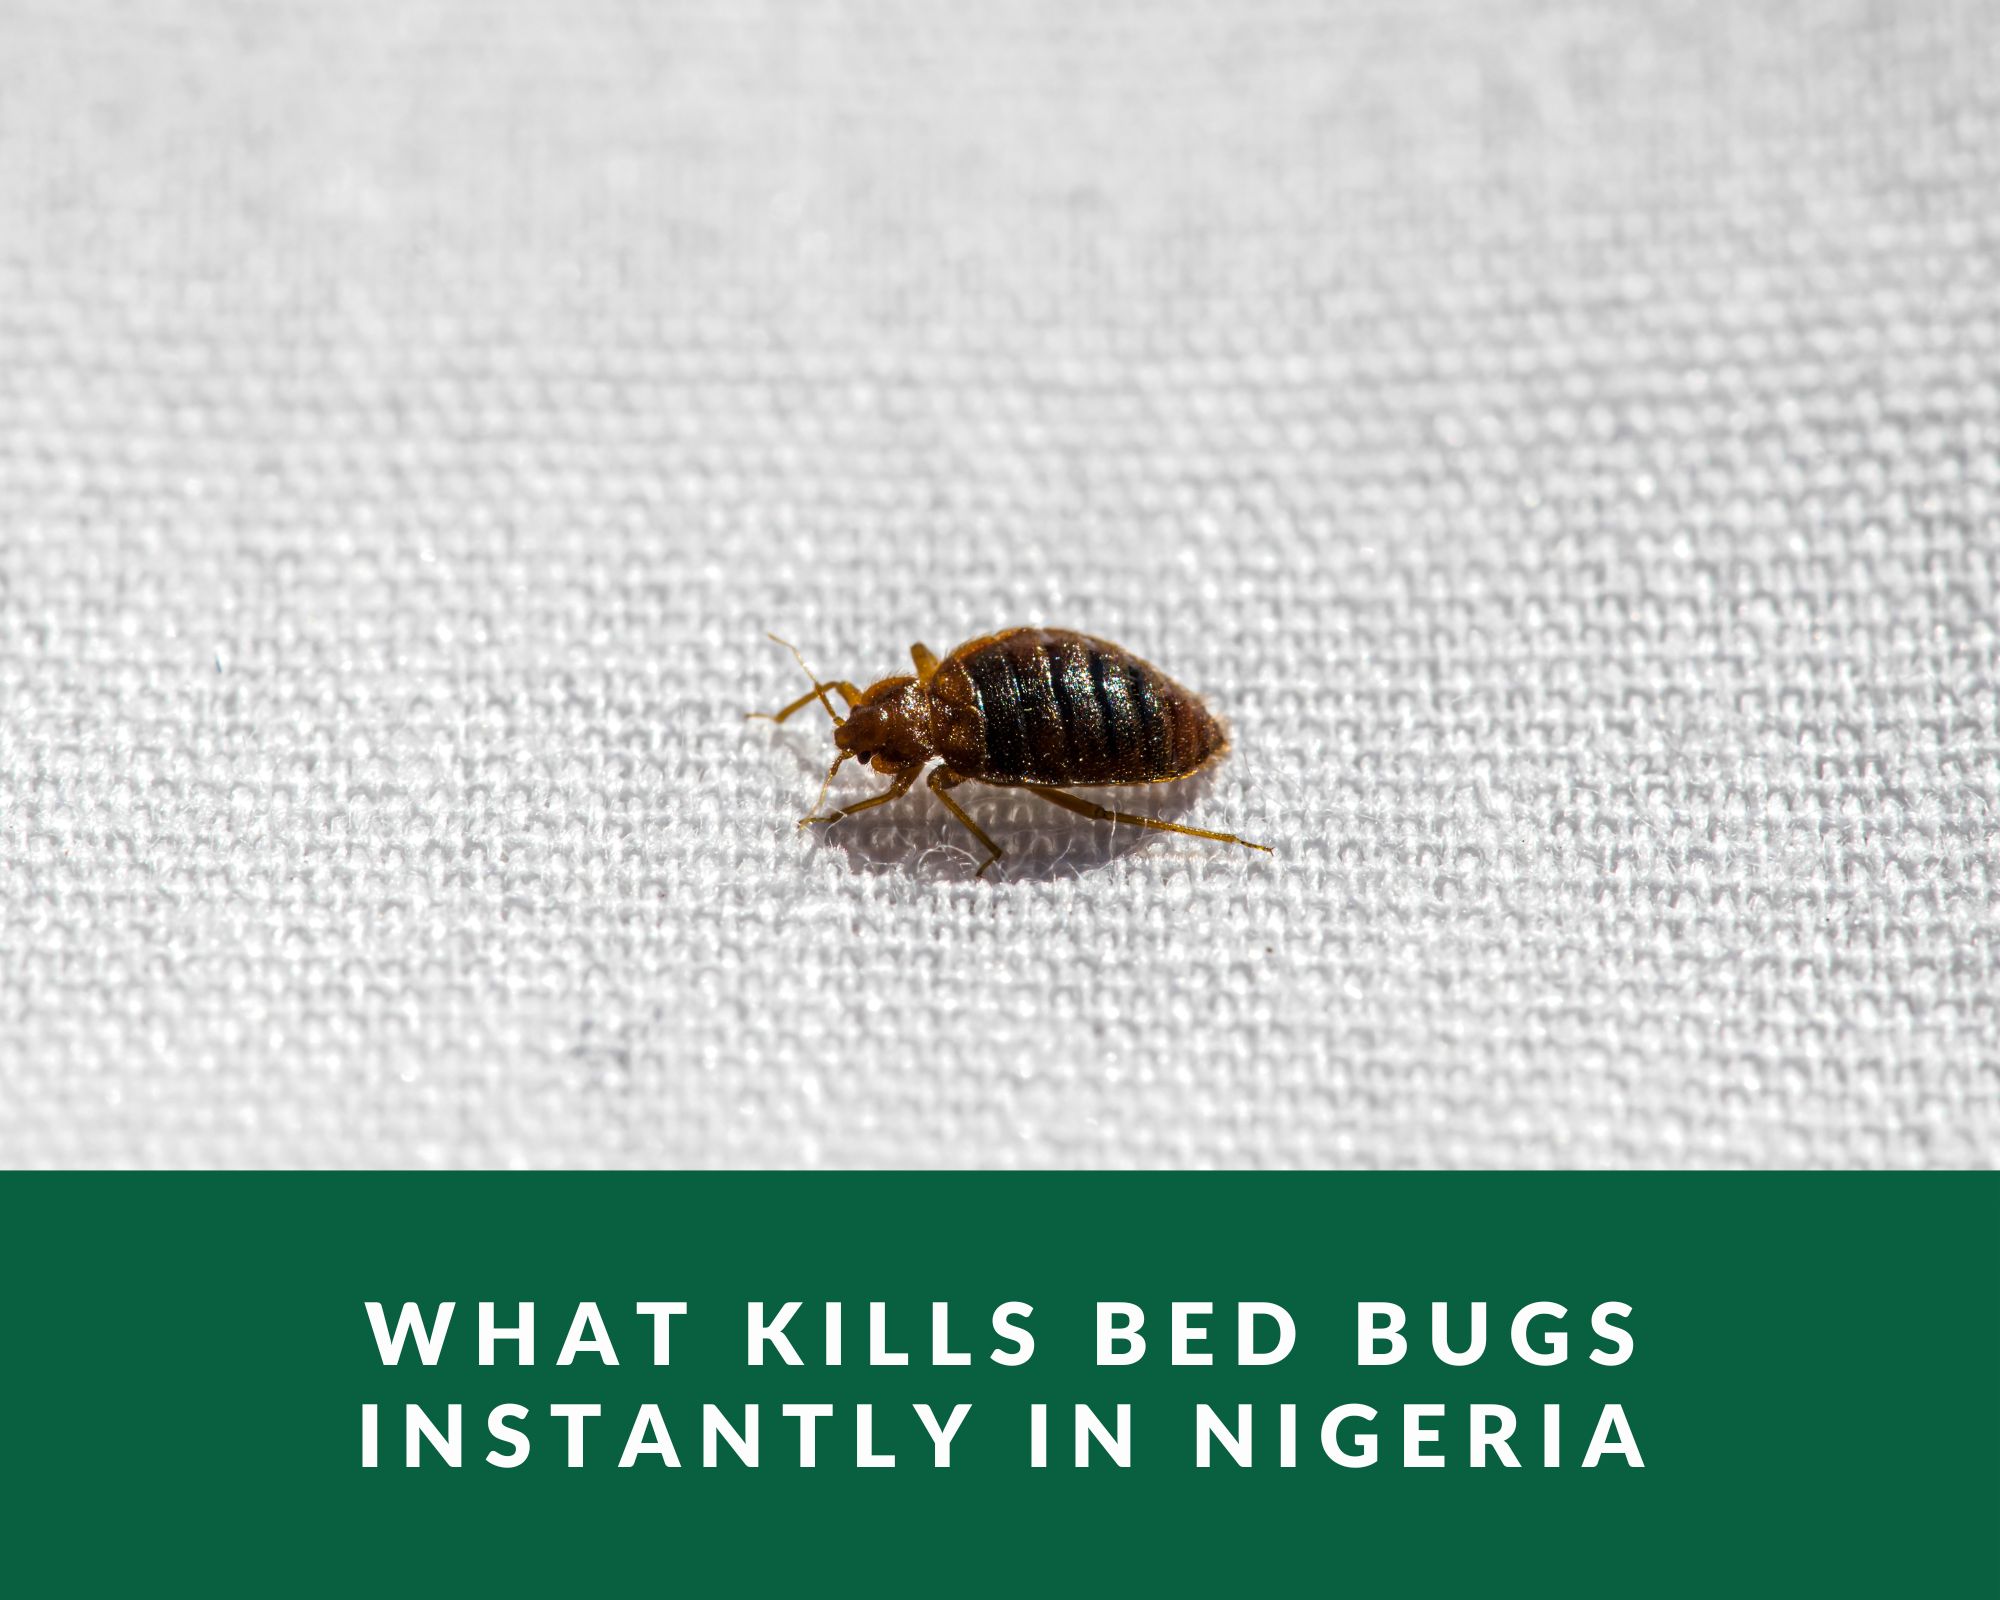 What Kills Bed Bugs Instantly in Nigeria